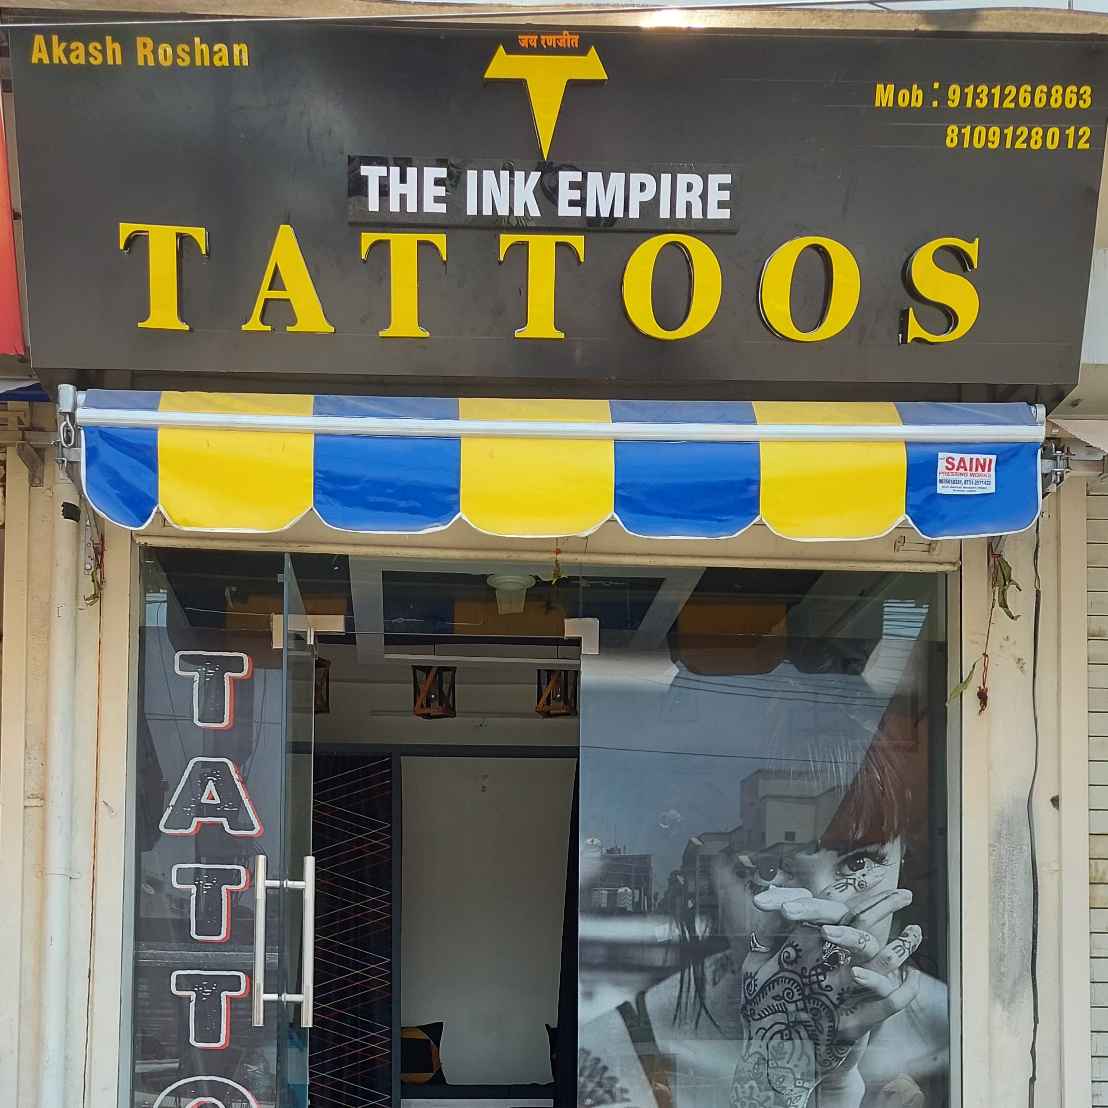 The Ink Empire Tattoos